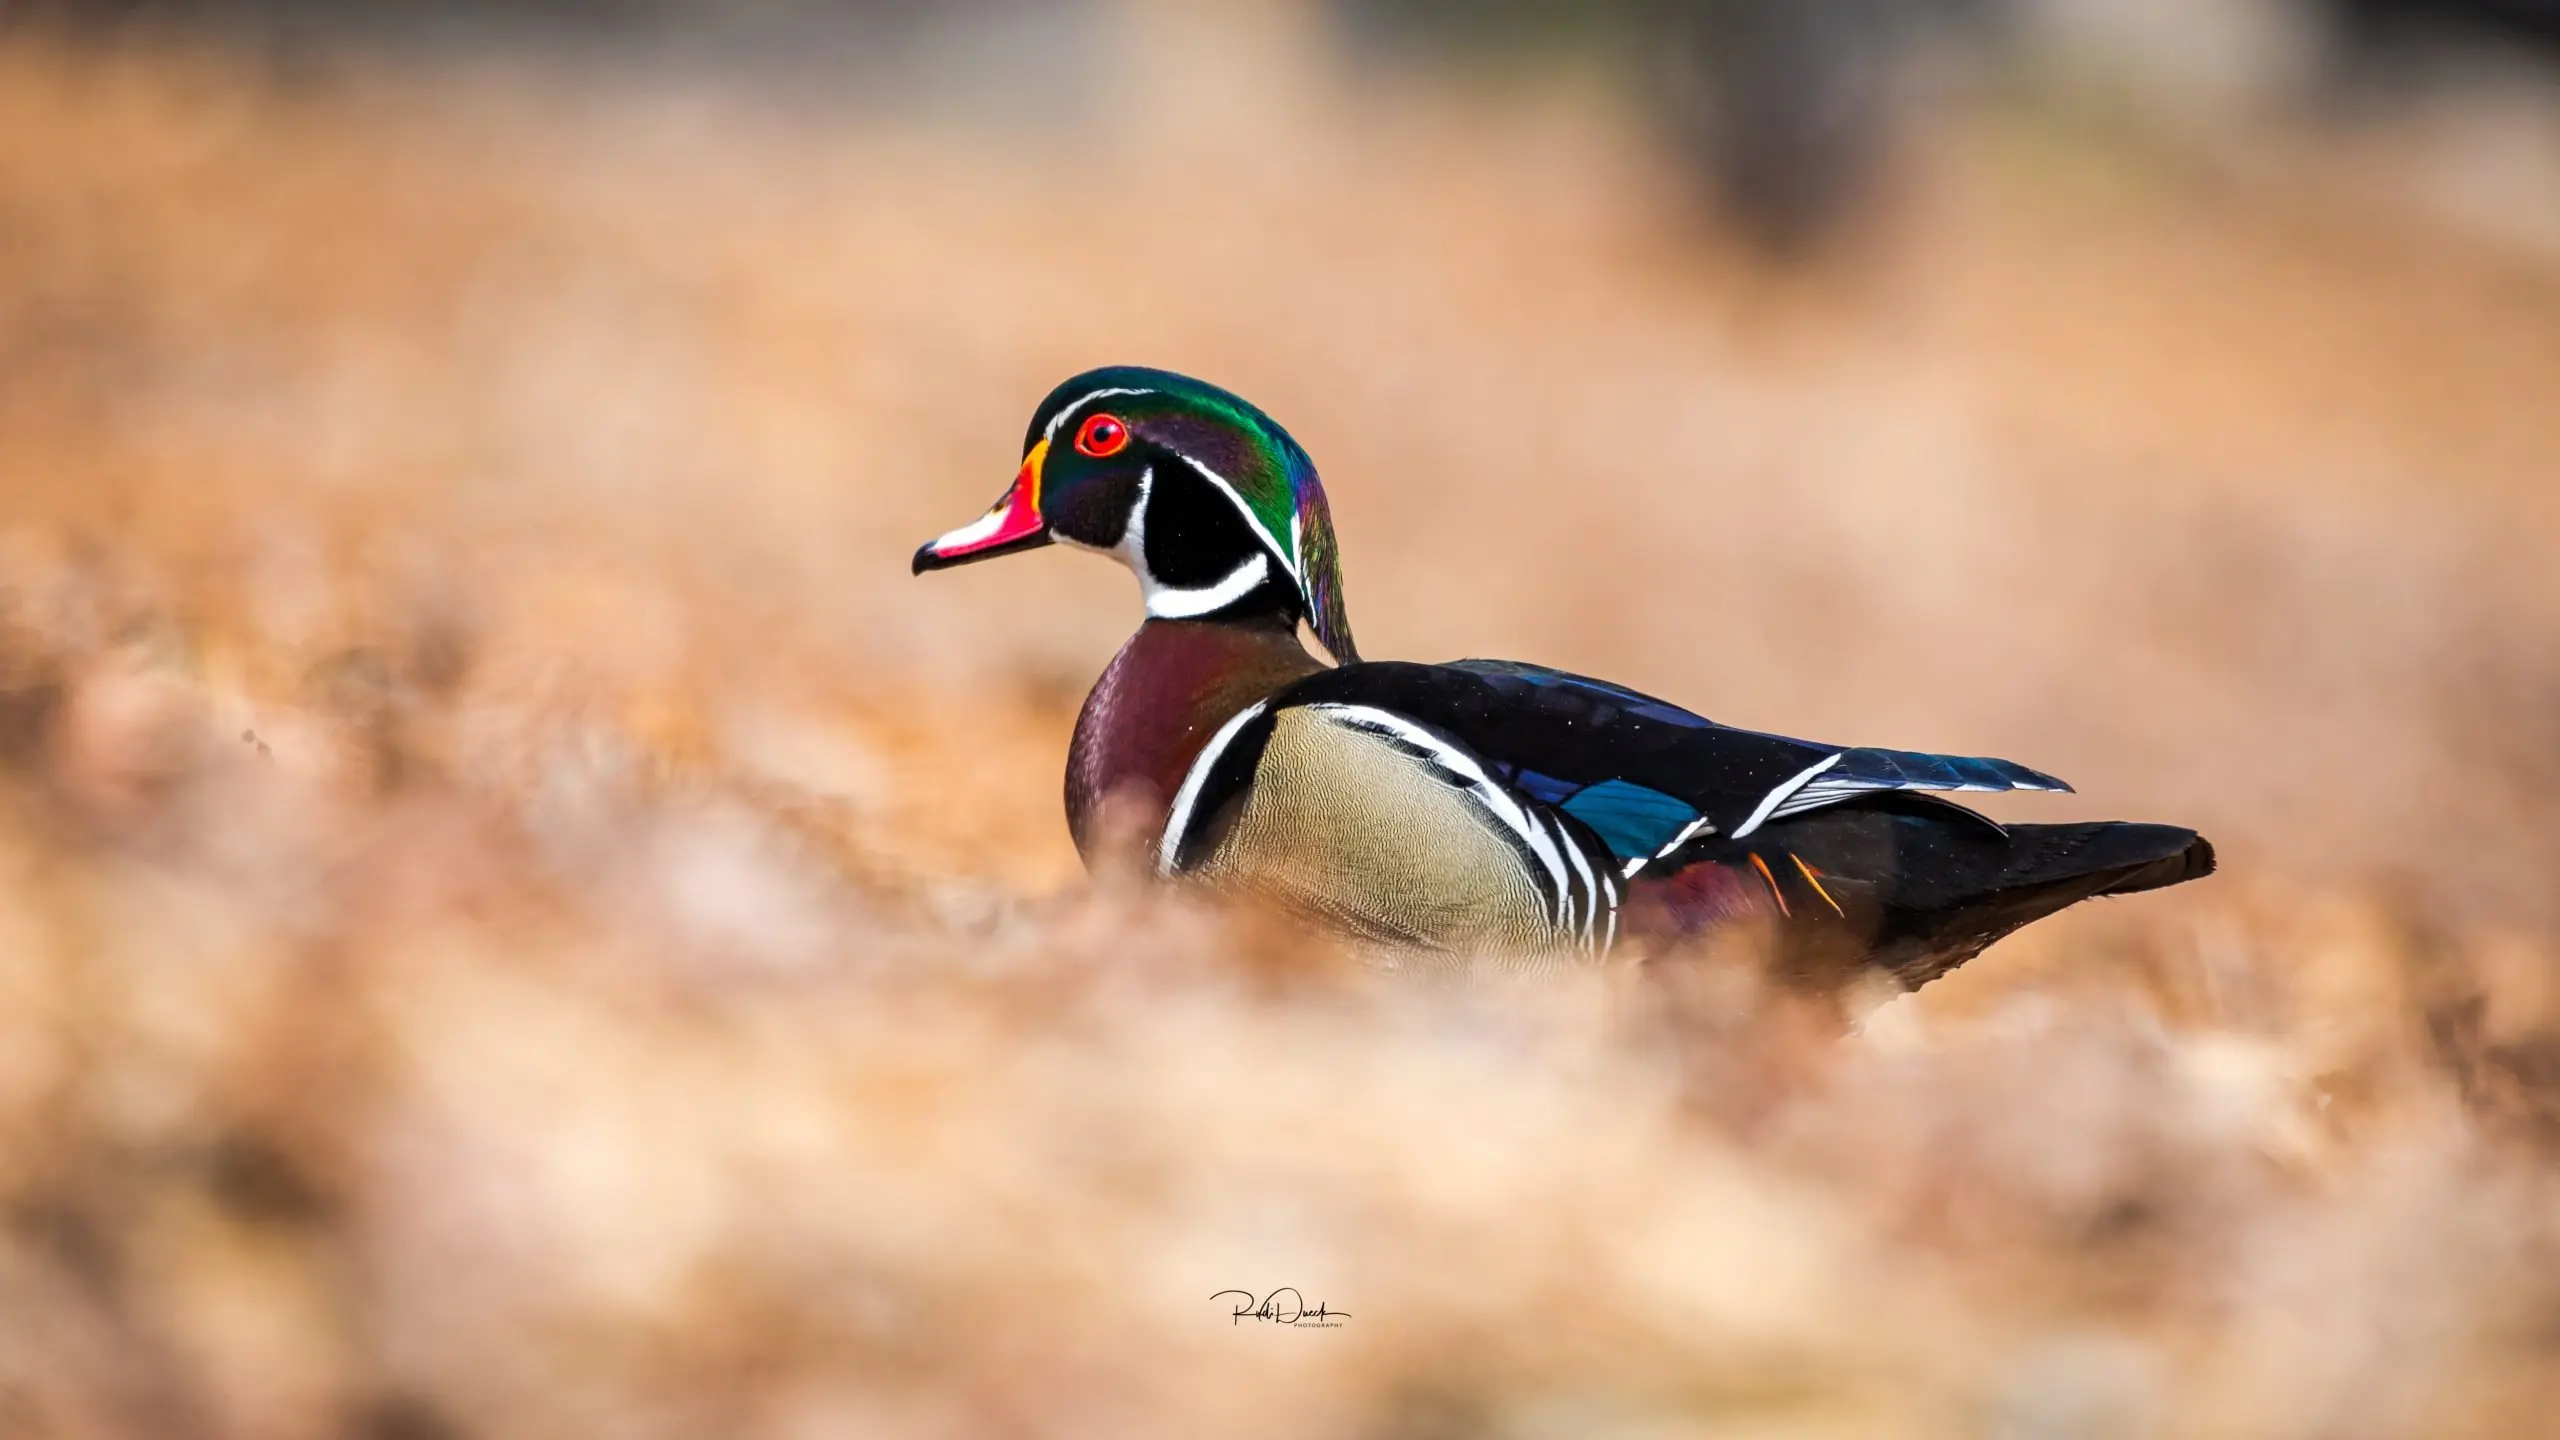 2560x1440 Male Wood Duck The Nomad Outdoor Adventure Photographer Rudi Dueck | Landscape | Bir | Nature | Insects | Wildlife | Photography